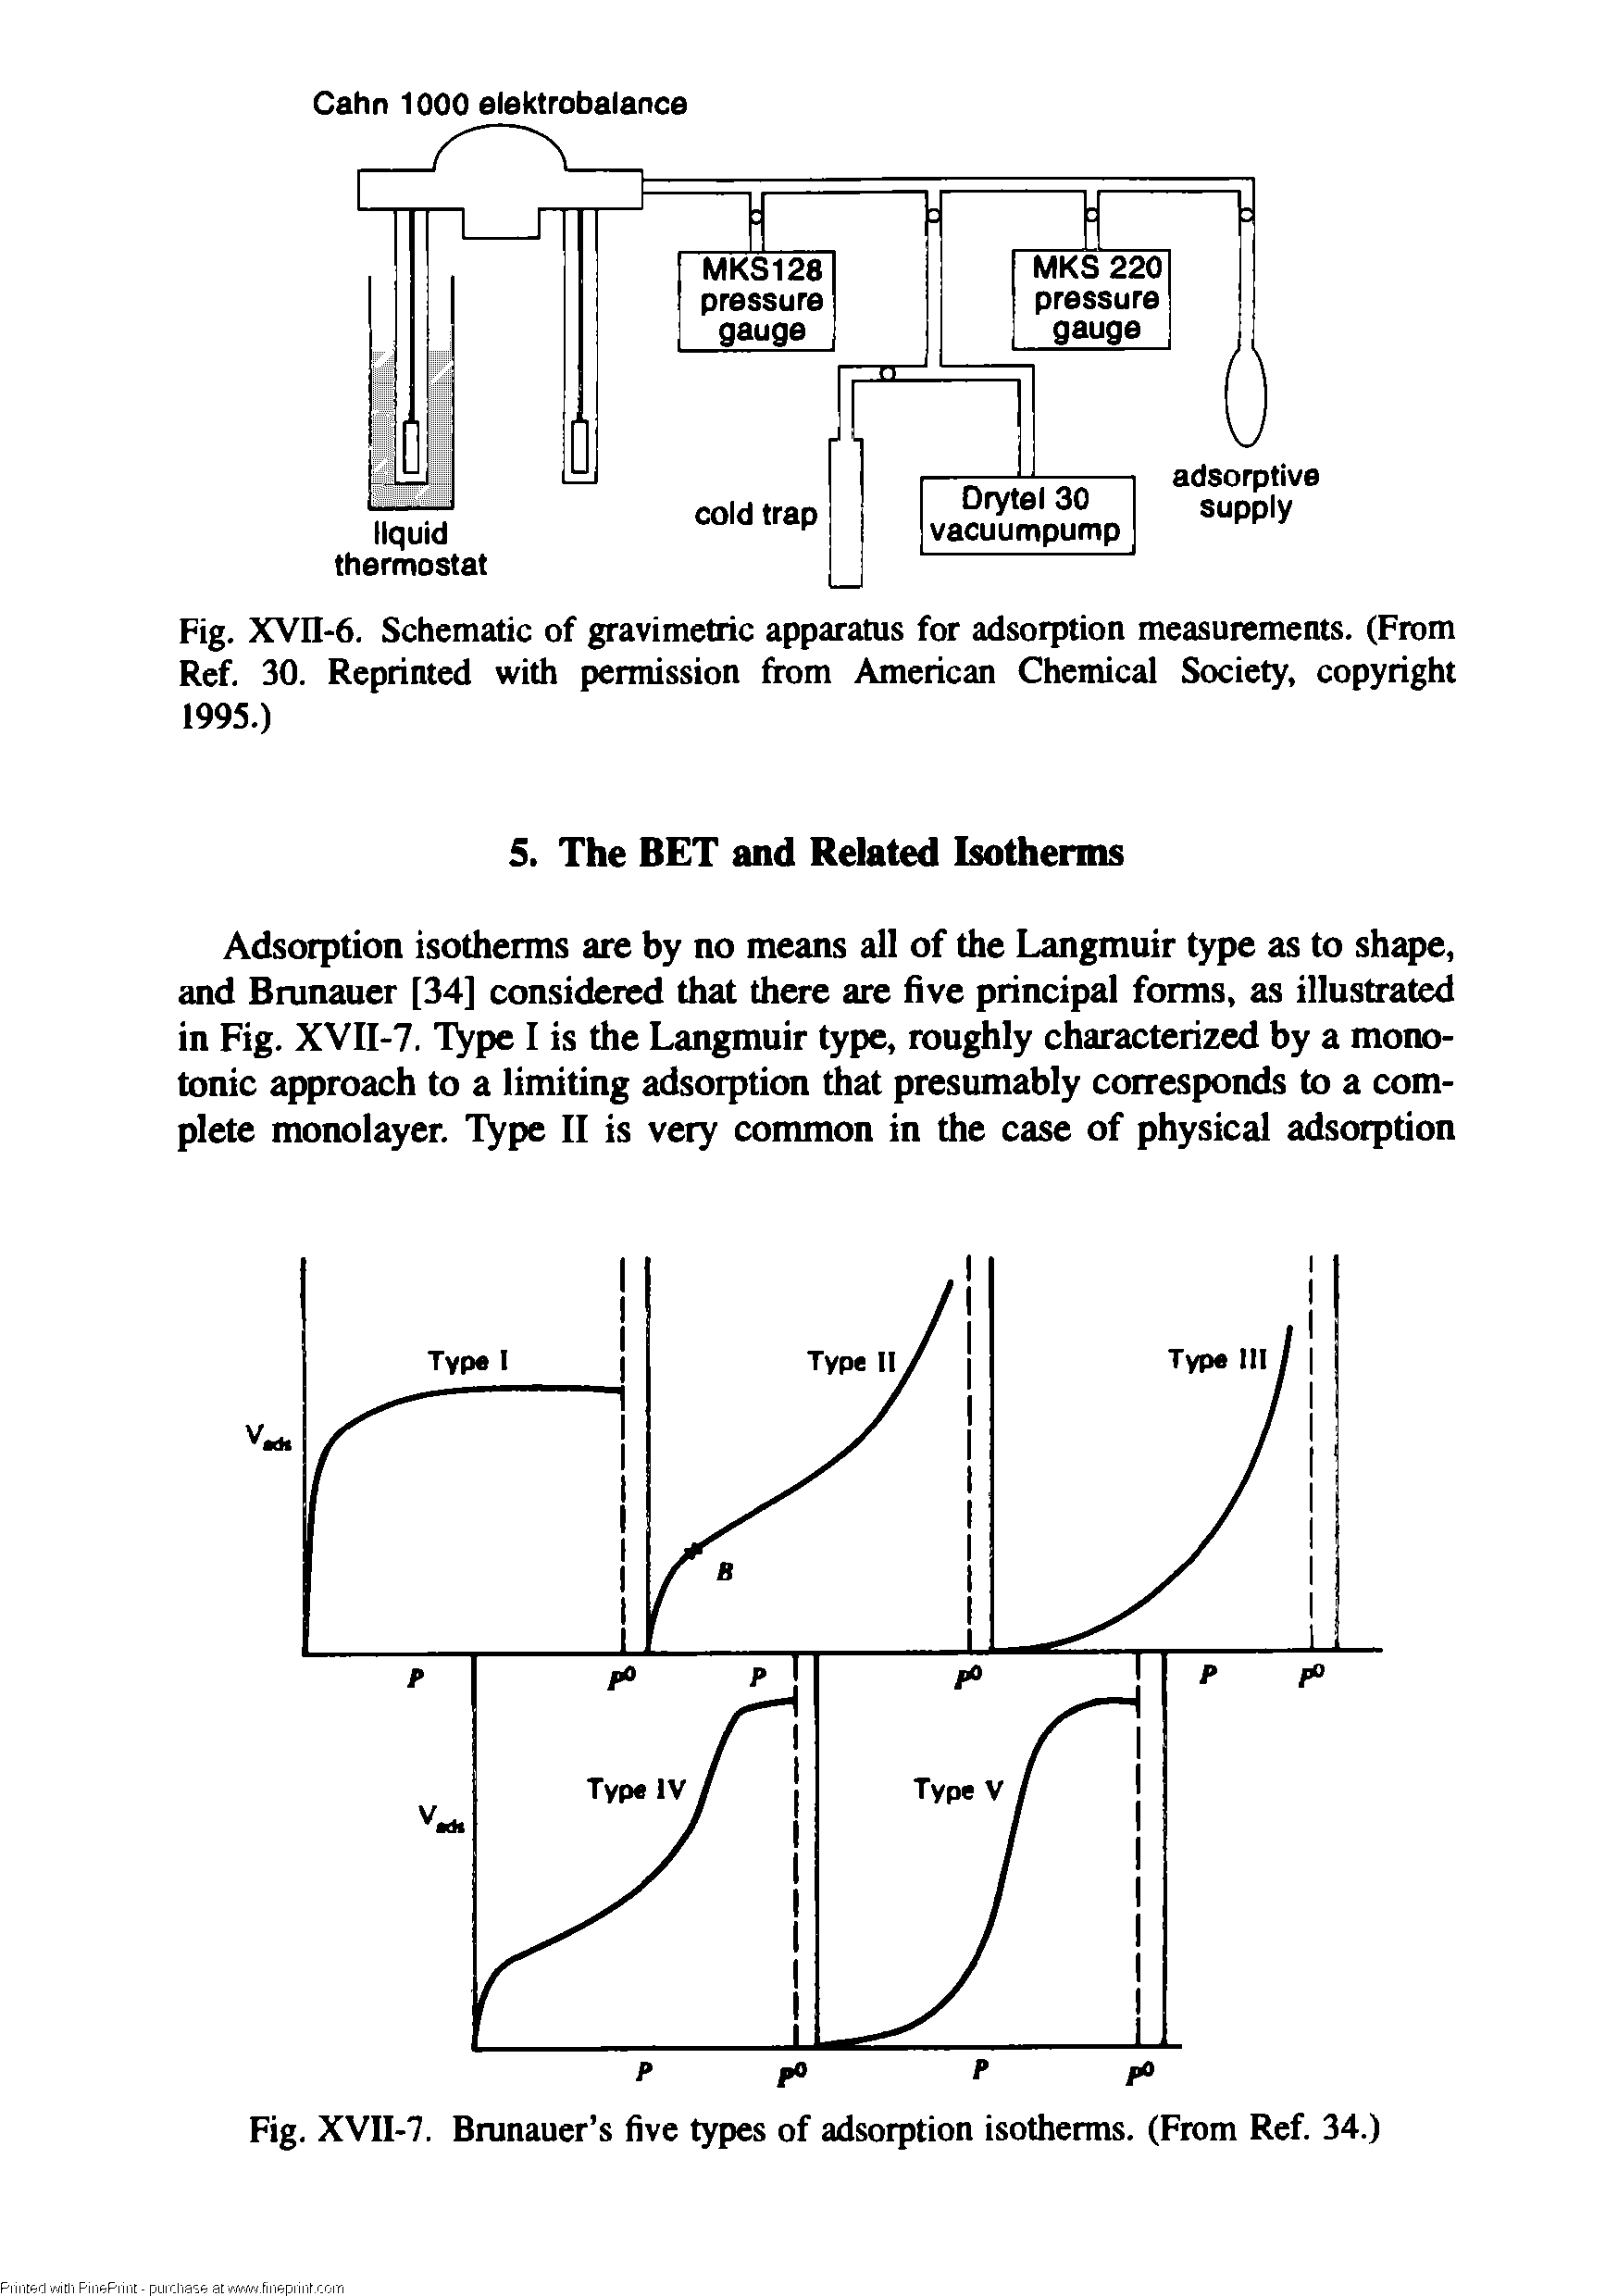 Fig. XVn-6. Schematic of gravimetric apparatus for adsorption measurements. (From Ref. 30. Reprinted with permission from American Chemical Society, copyright 1995.)...